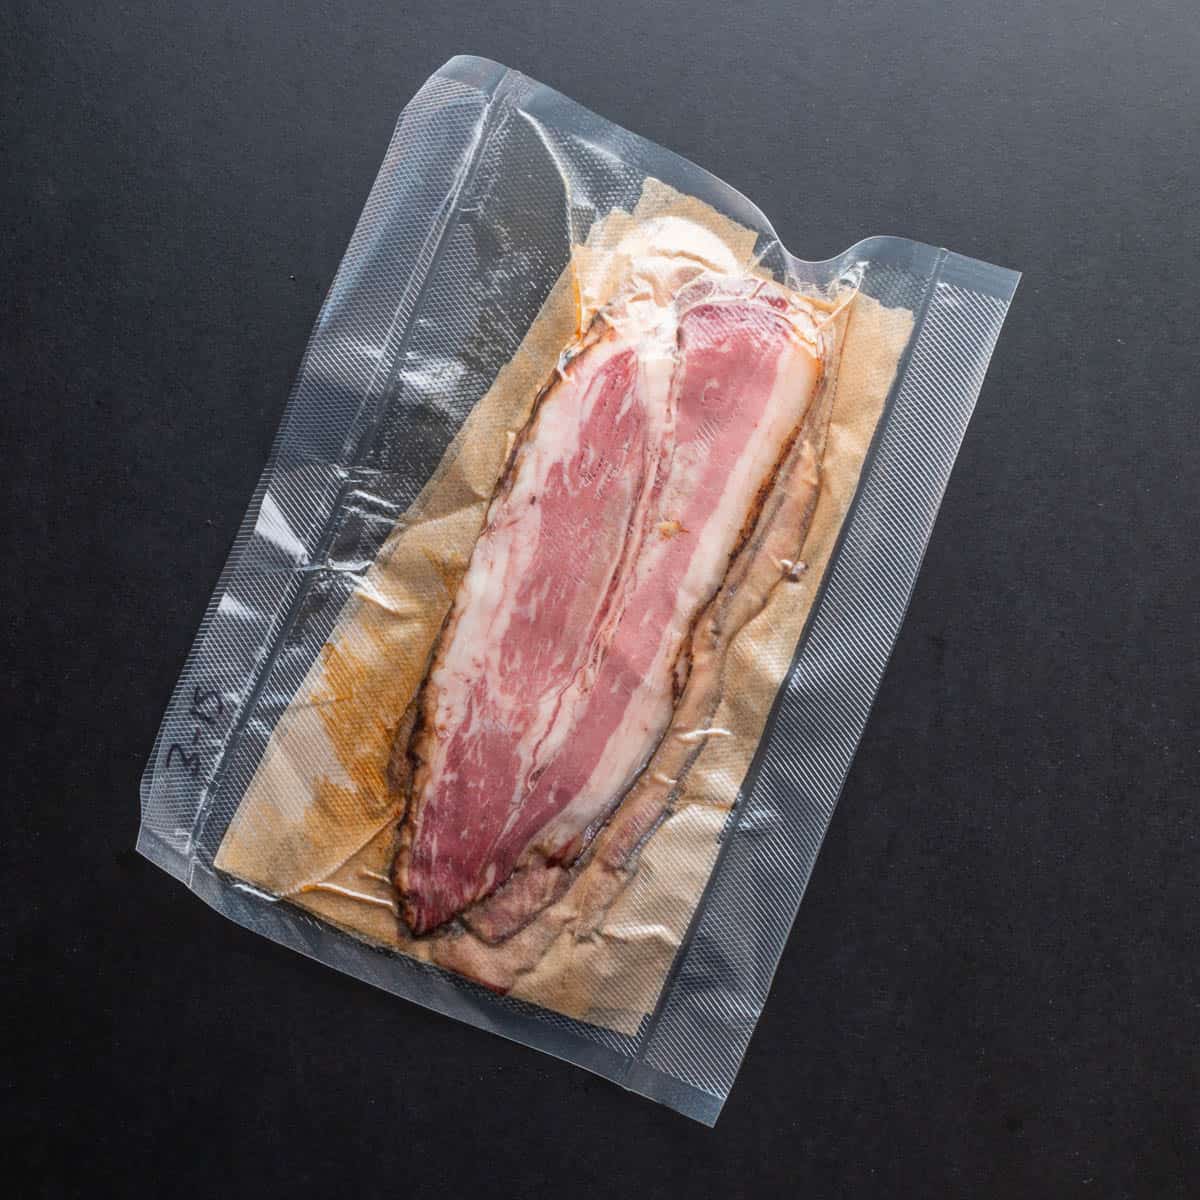 Sliced beef bacon layered in parchment in a vacuum sealed bag.